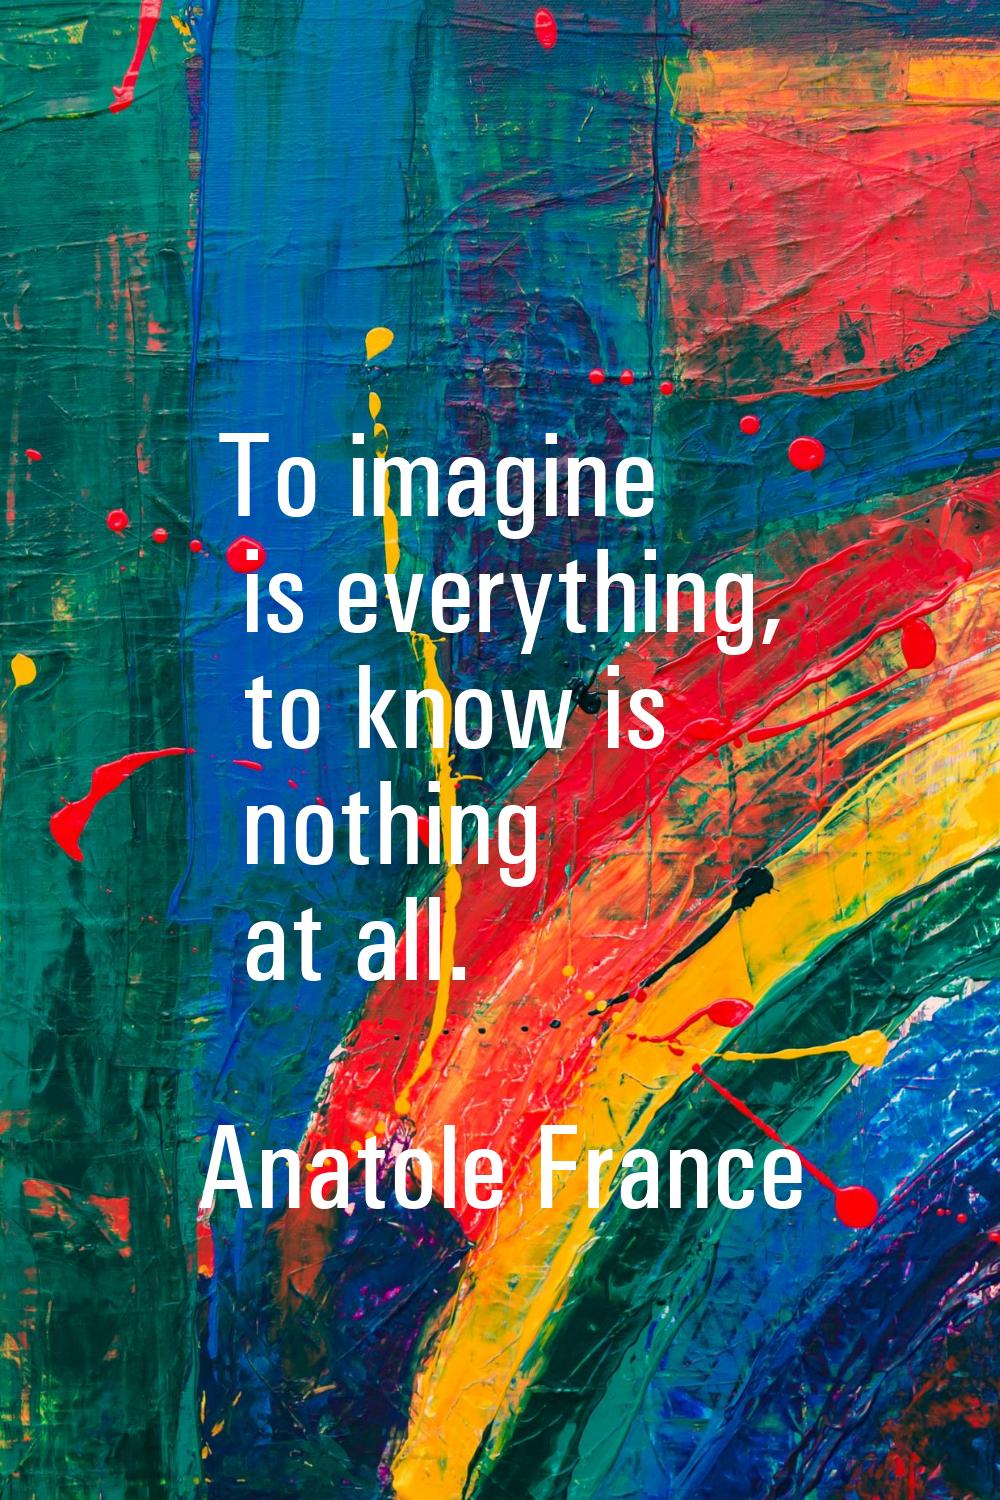 To imagine is everything, to know is nothing at all.